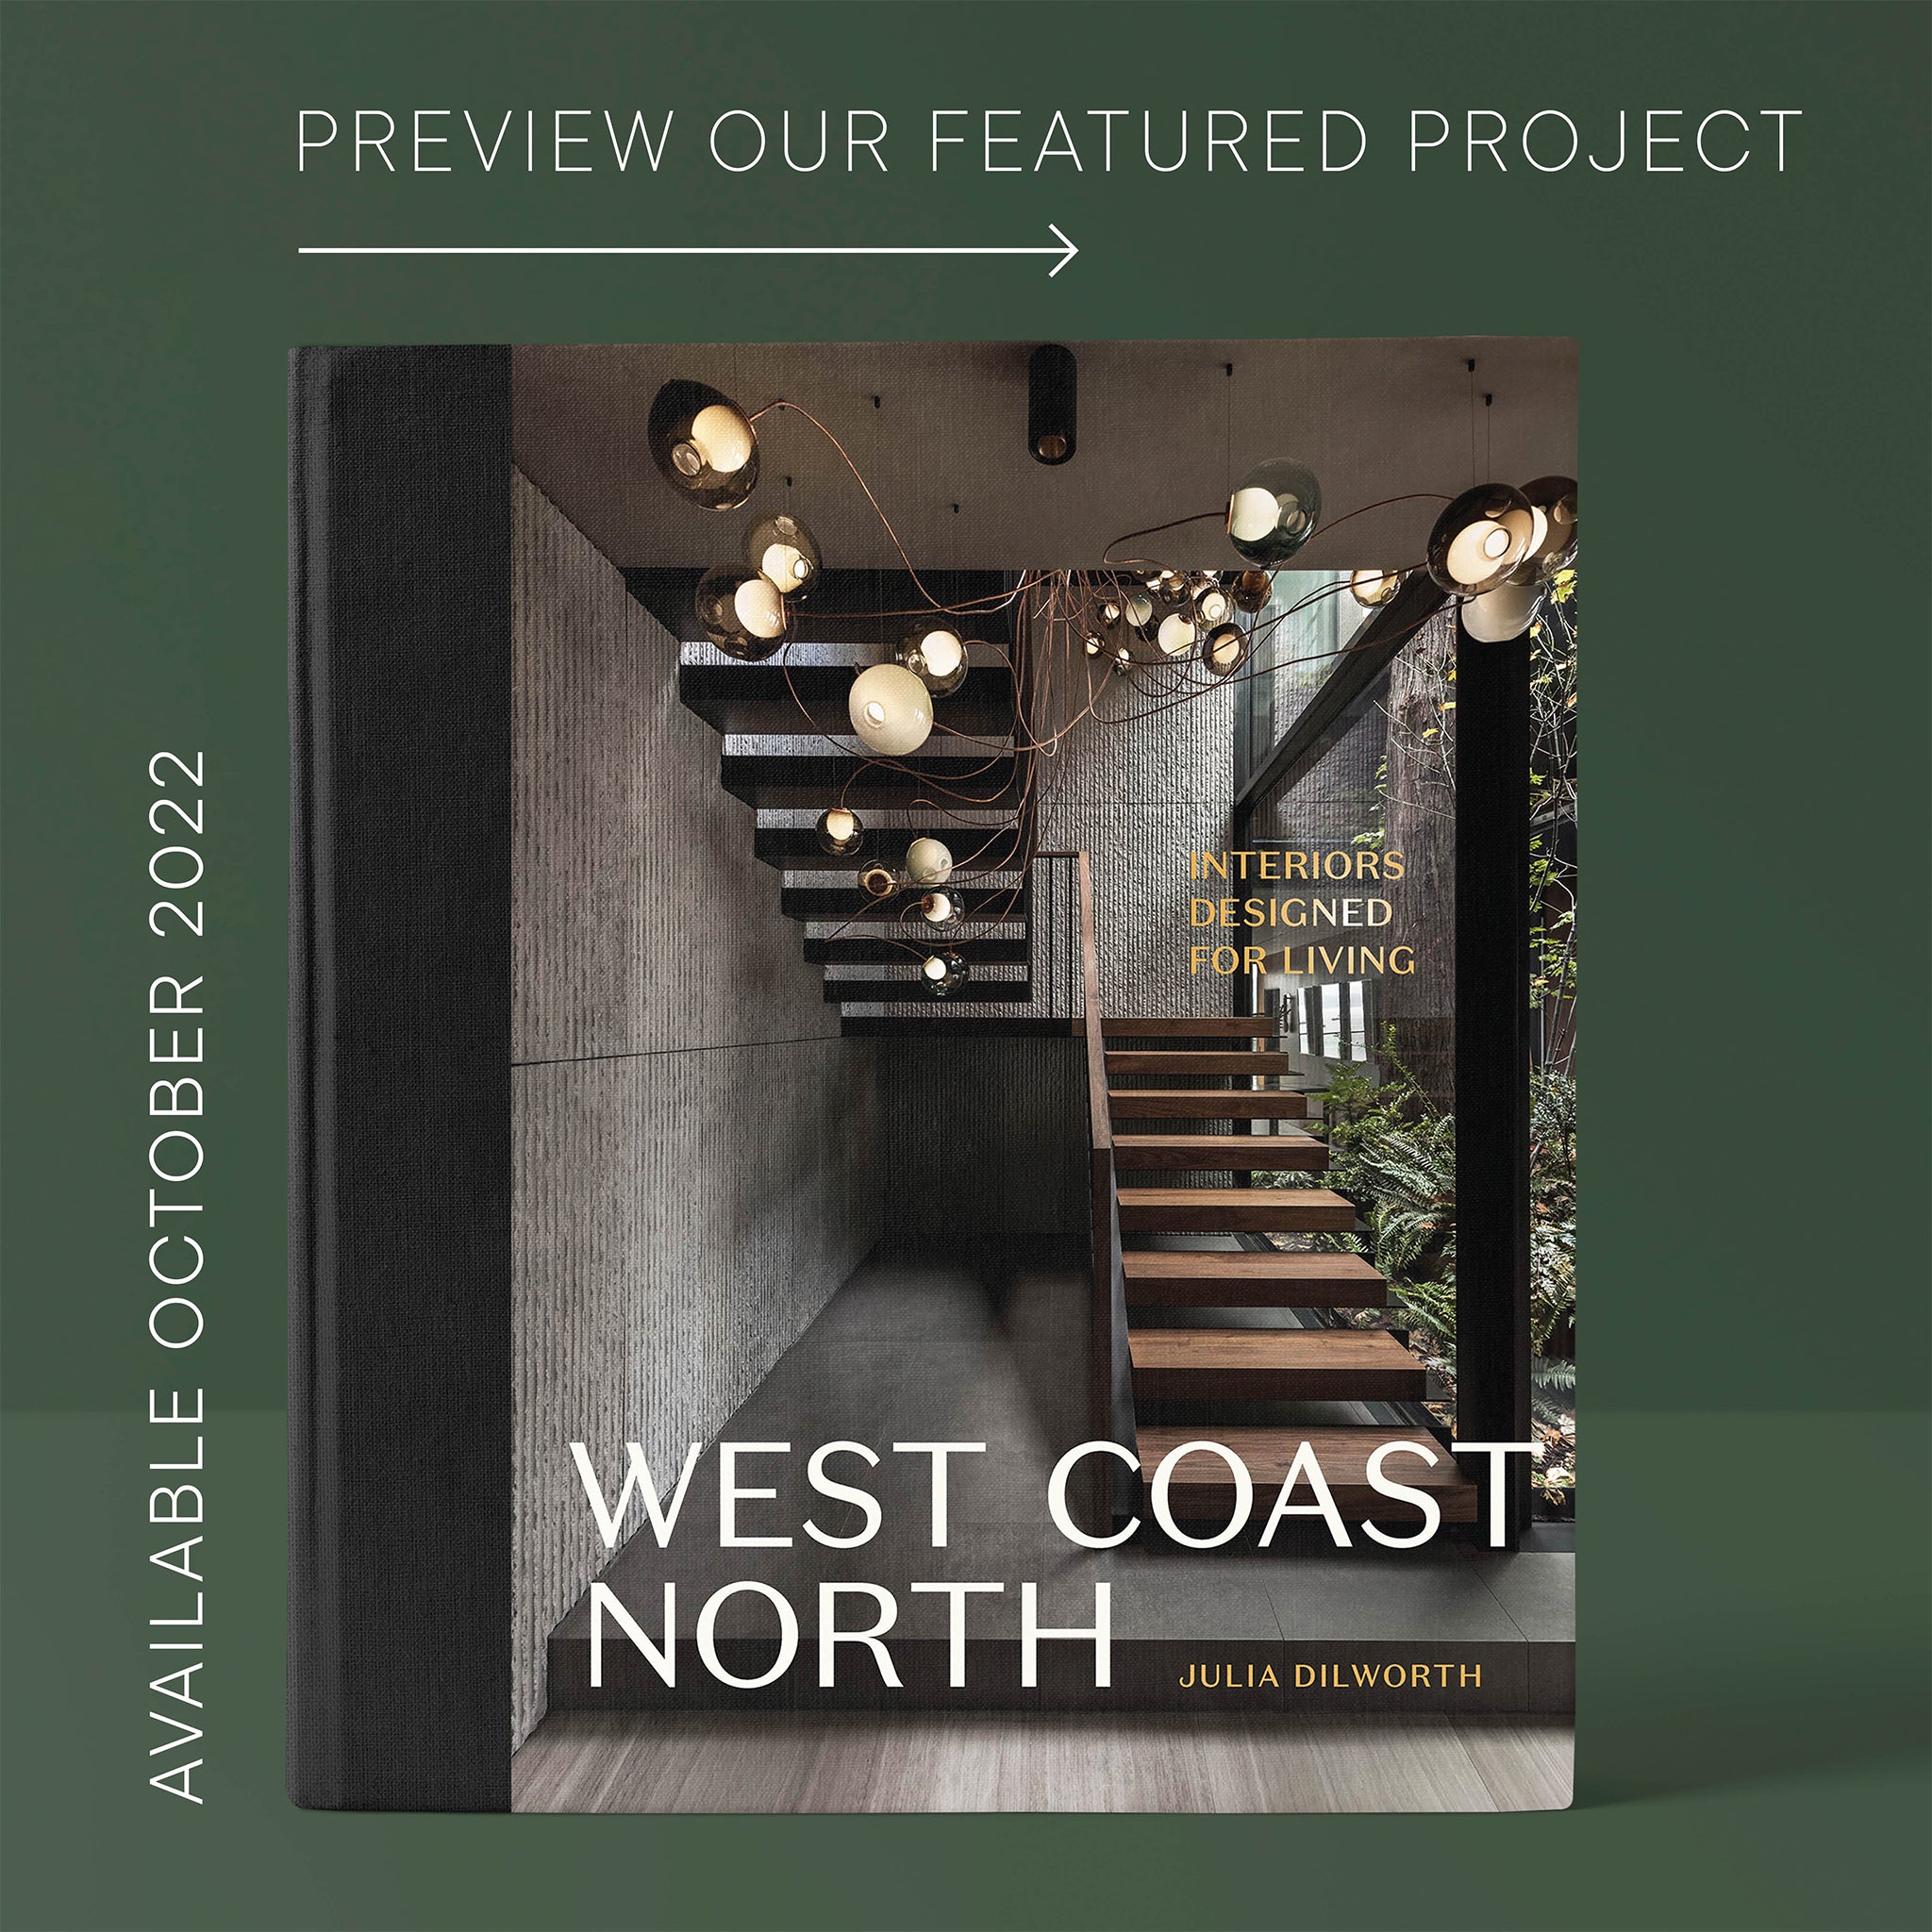 "West Coast North: Interiors Designed for Living" Hardcover Book